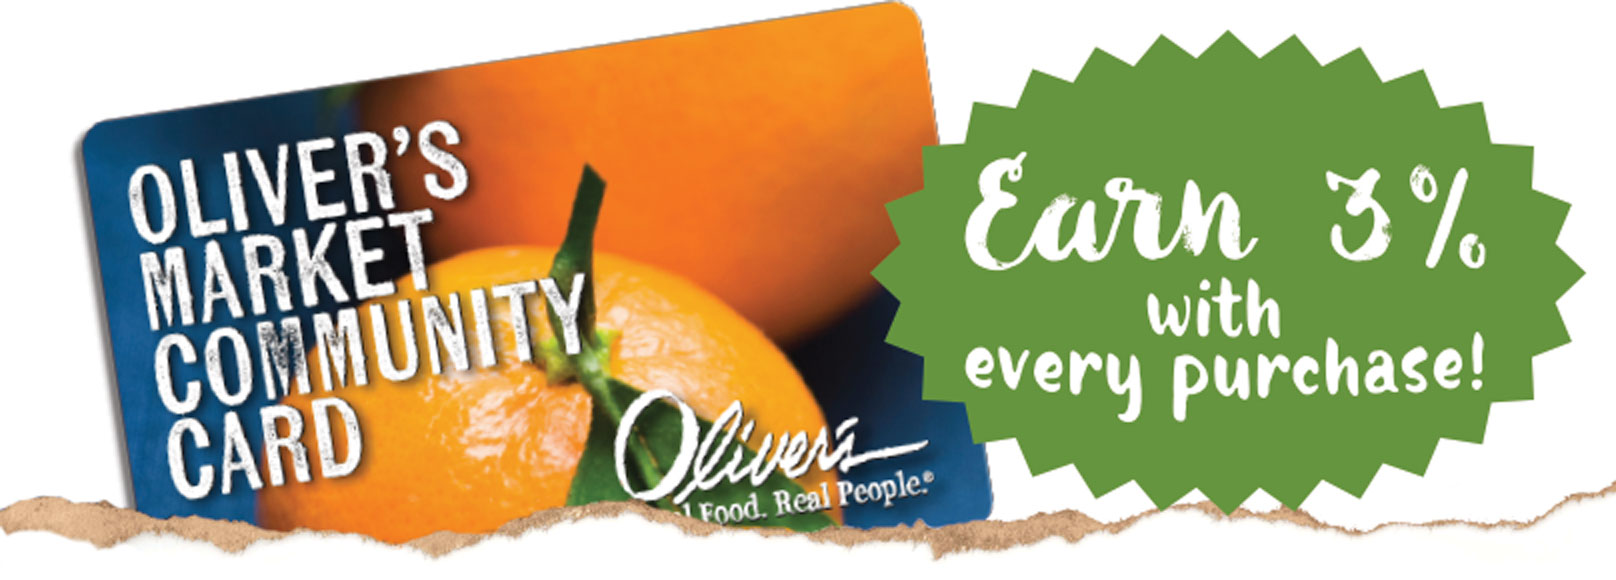 Earn with Oliver's